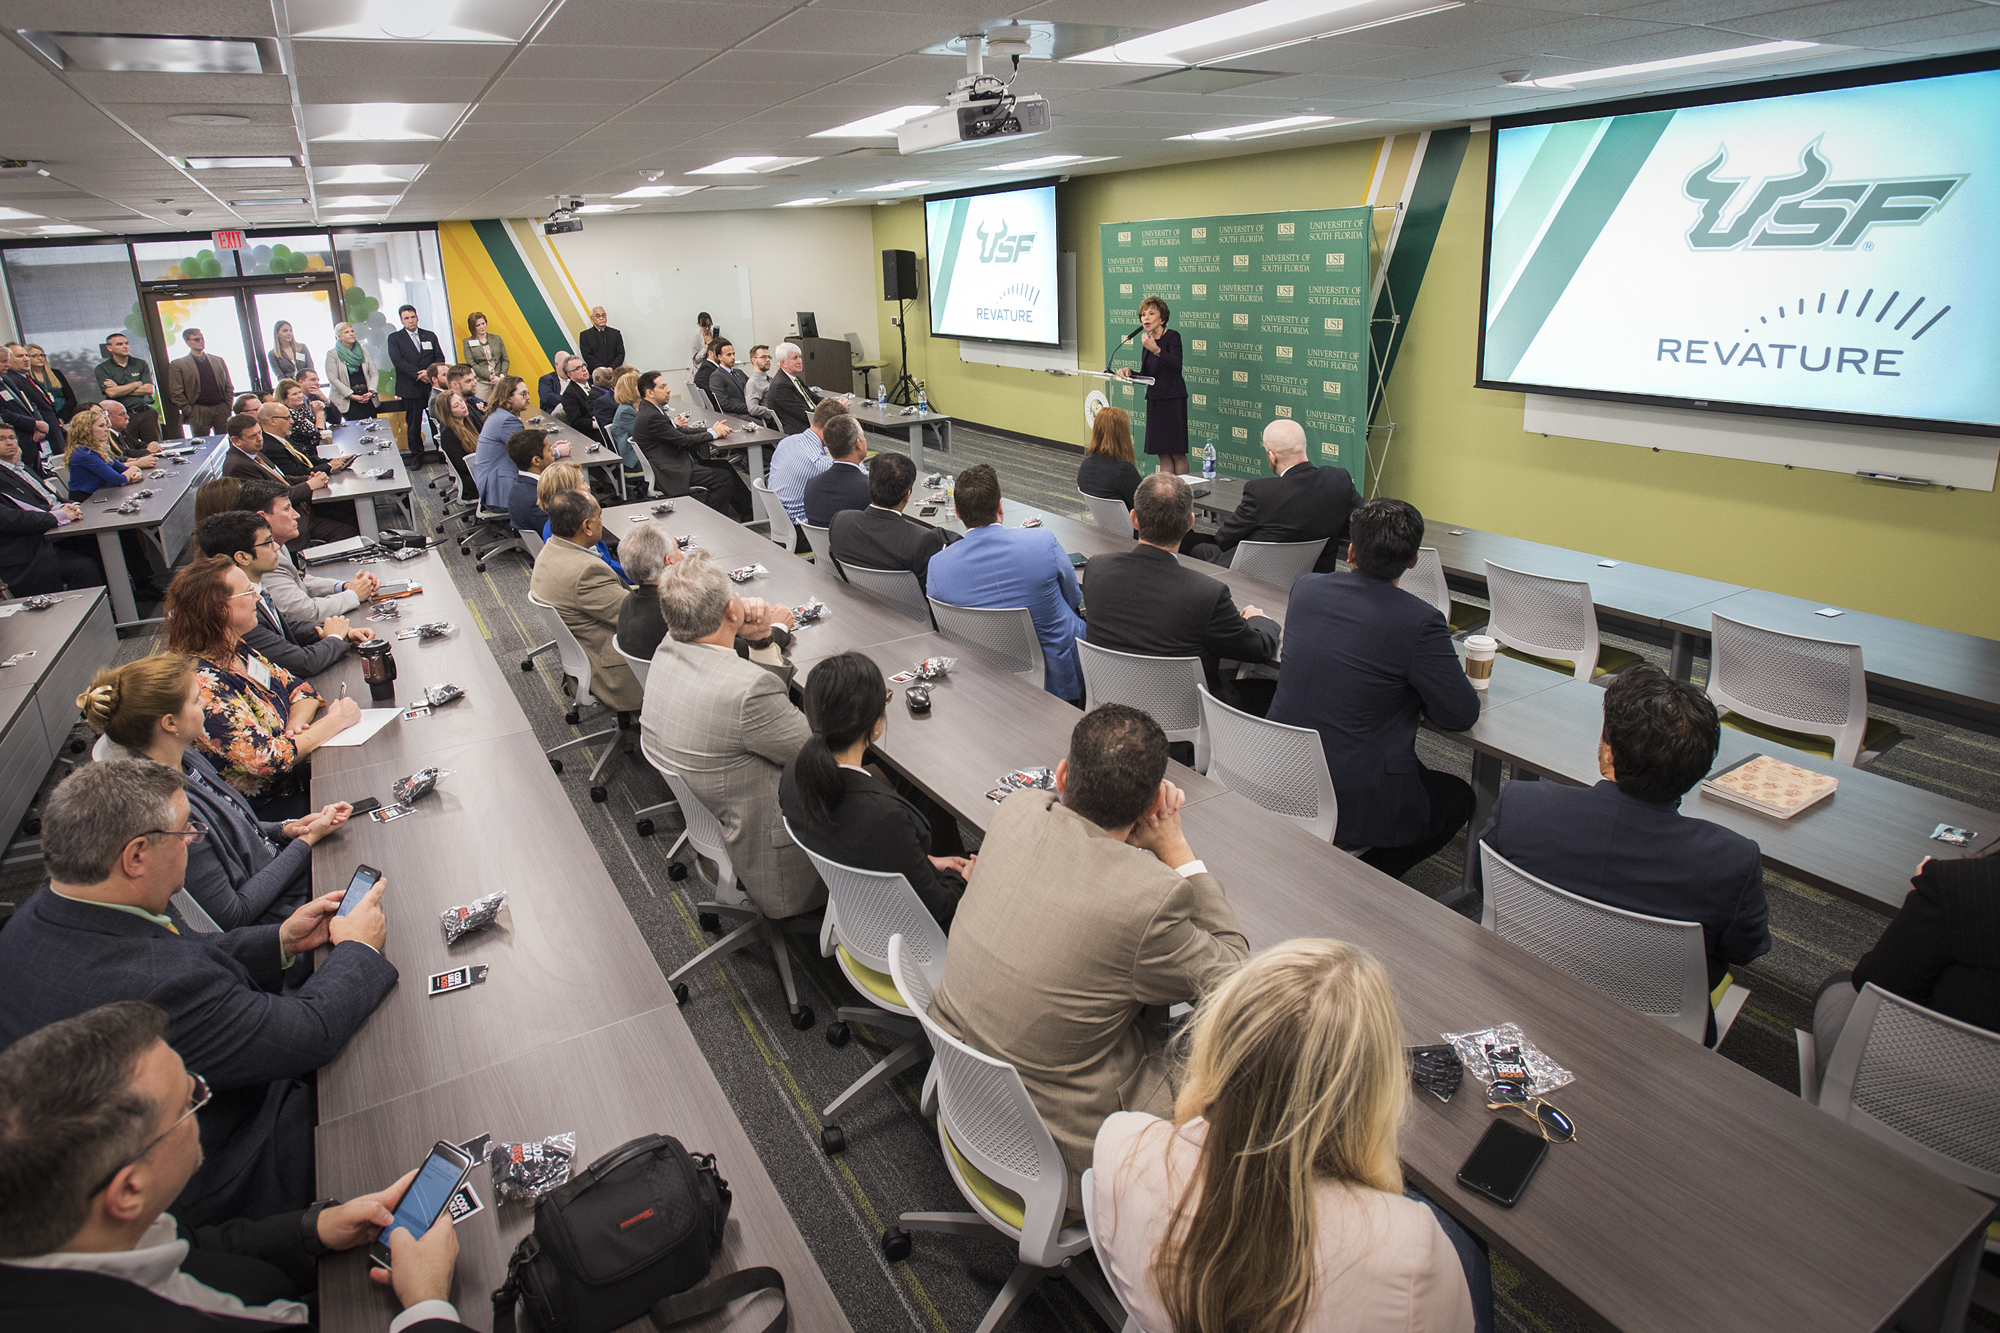 USF President Judy Genshaft, at podium, announcing the university's expanded partnership with tech talent development firm Revature. Courtesy photo.